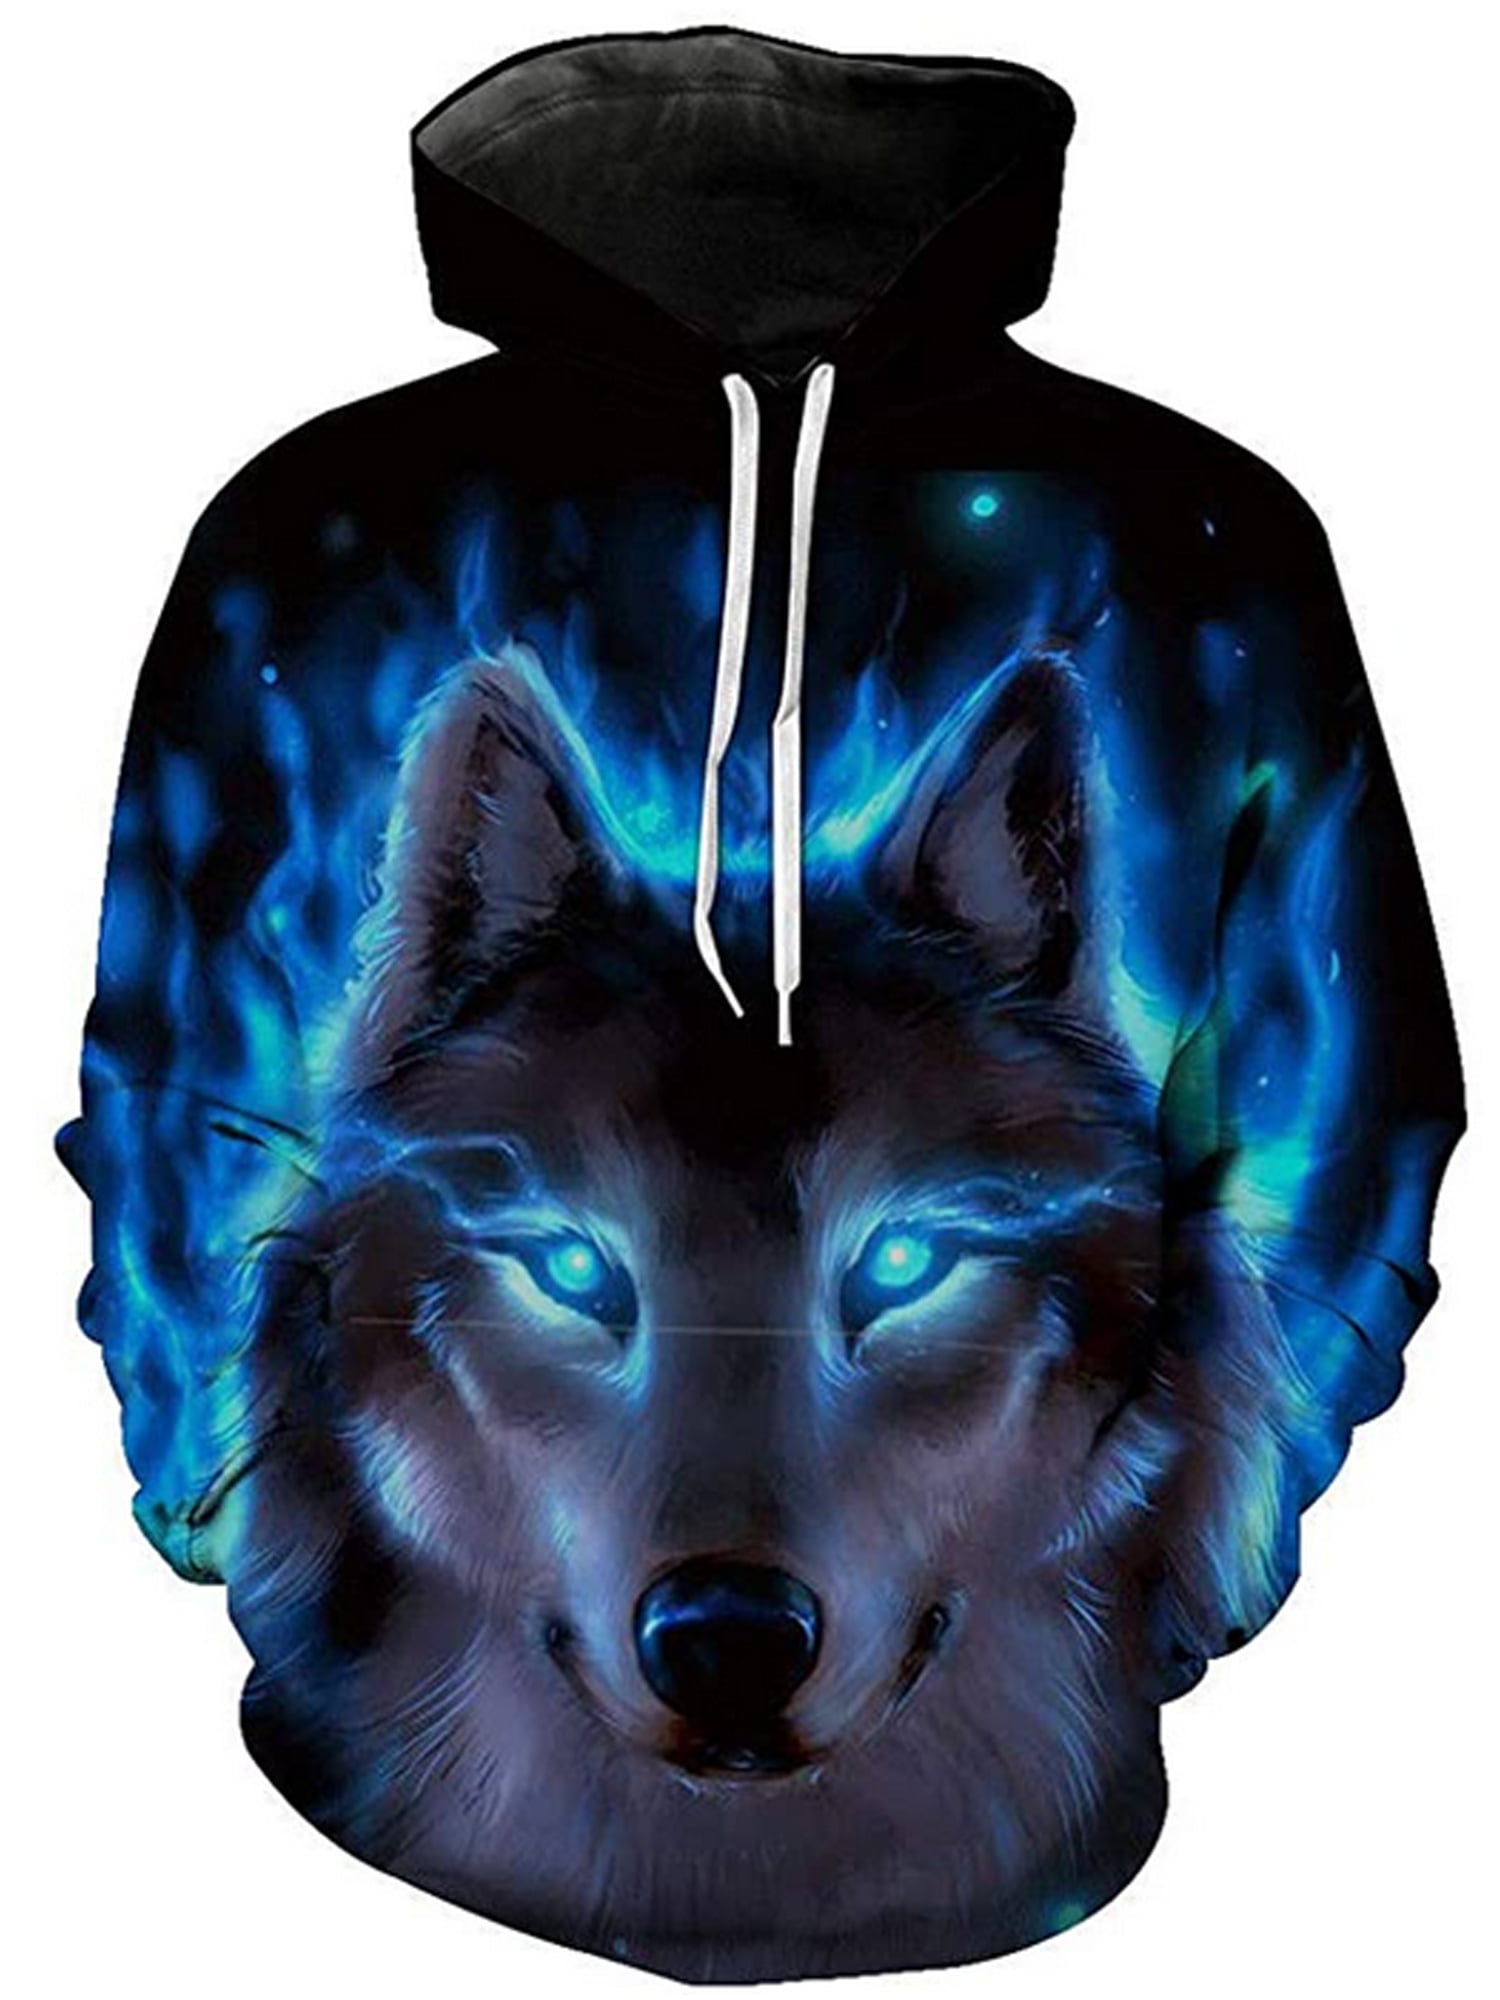 3D Snow Mountain Forest Wolf Print Fashion Pullovers Streetwear Mens Hooded Sweatshirt